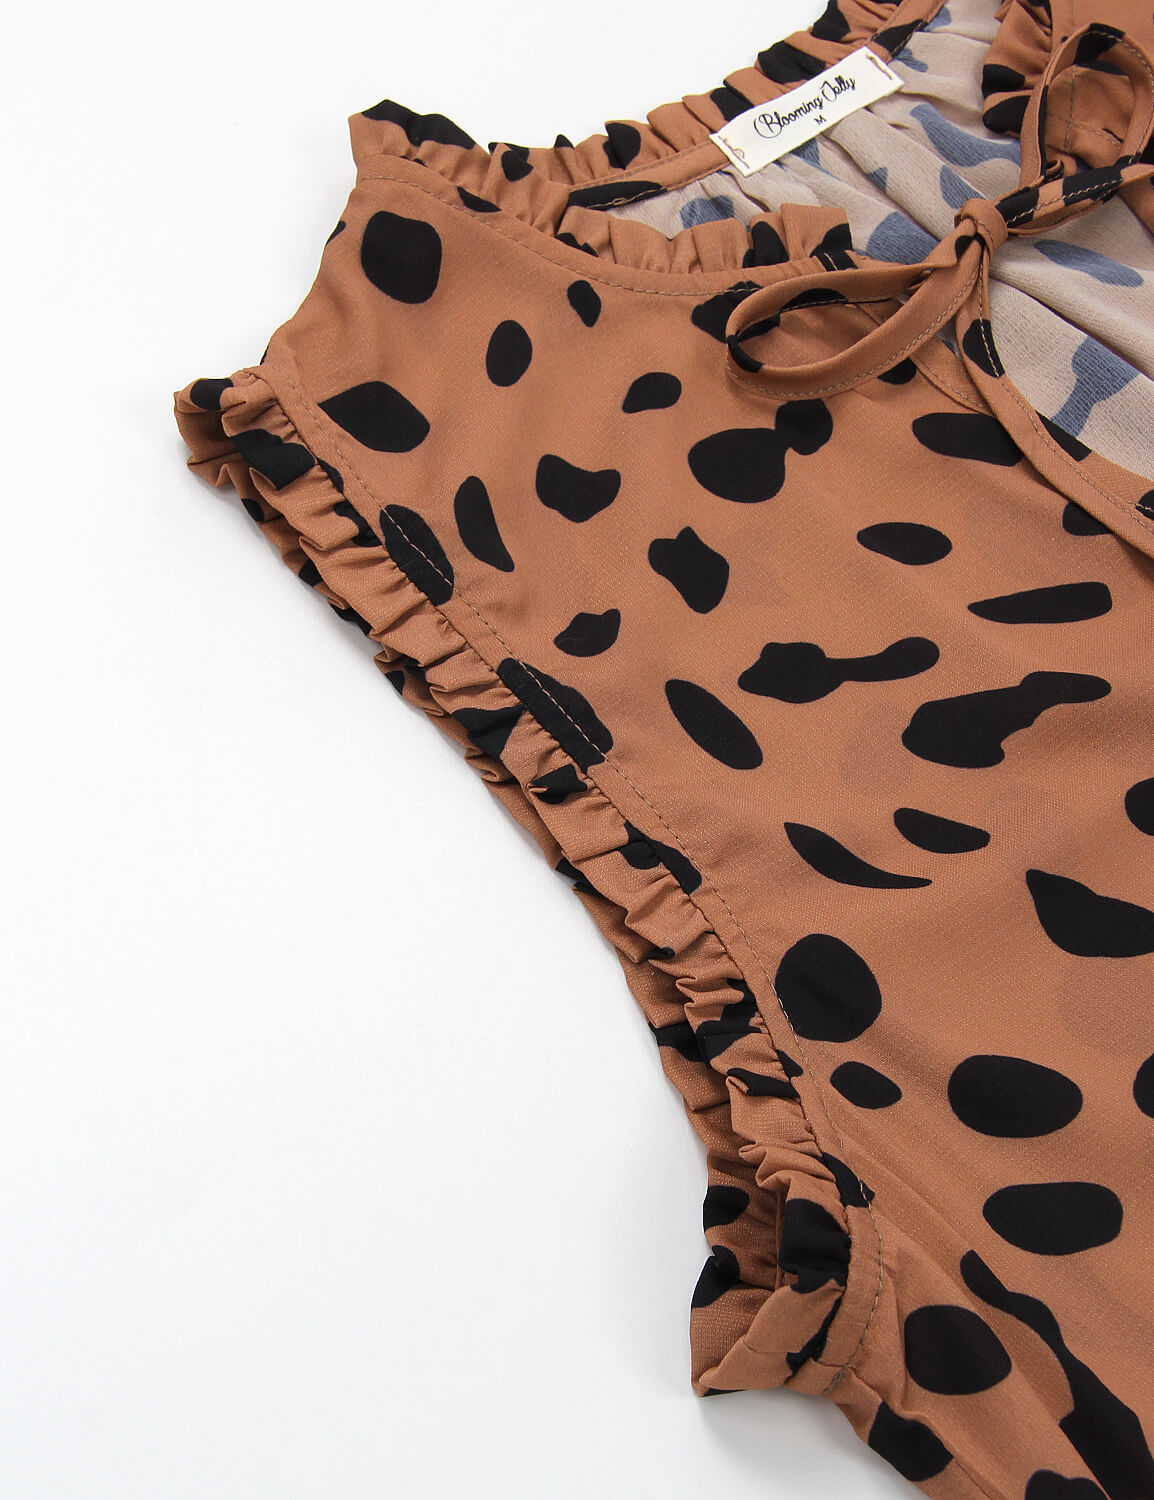 Blooming Jelly_Chic V Neck Sleeveless Leopard Blouse_Leopard Print_152661_32_Women Summer Casual Loose_Tops_Blouse